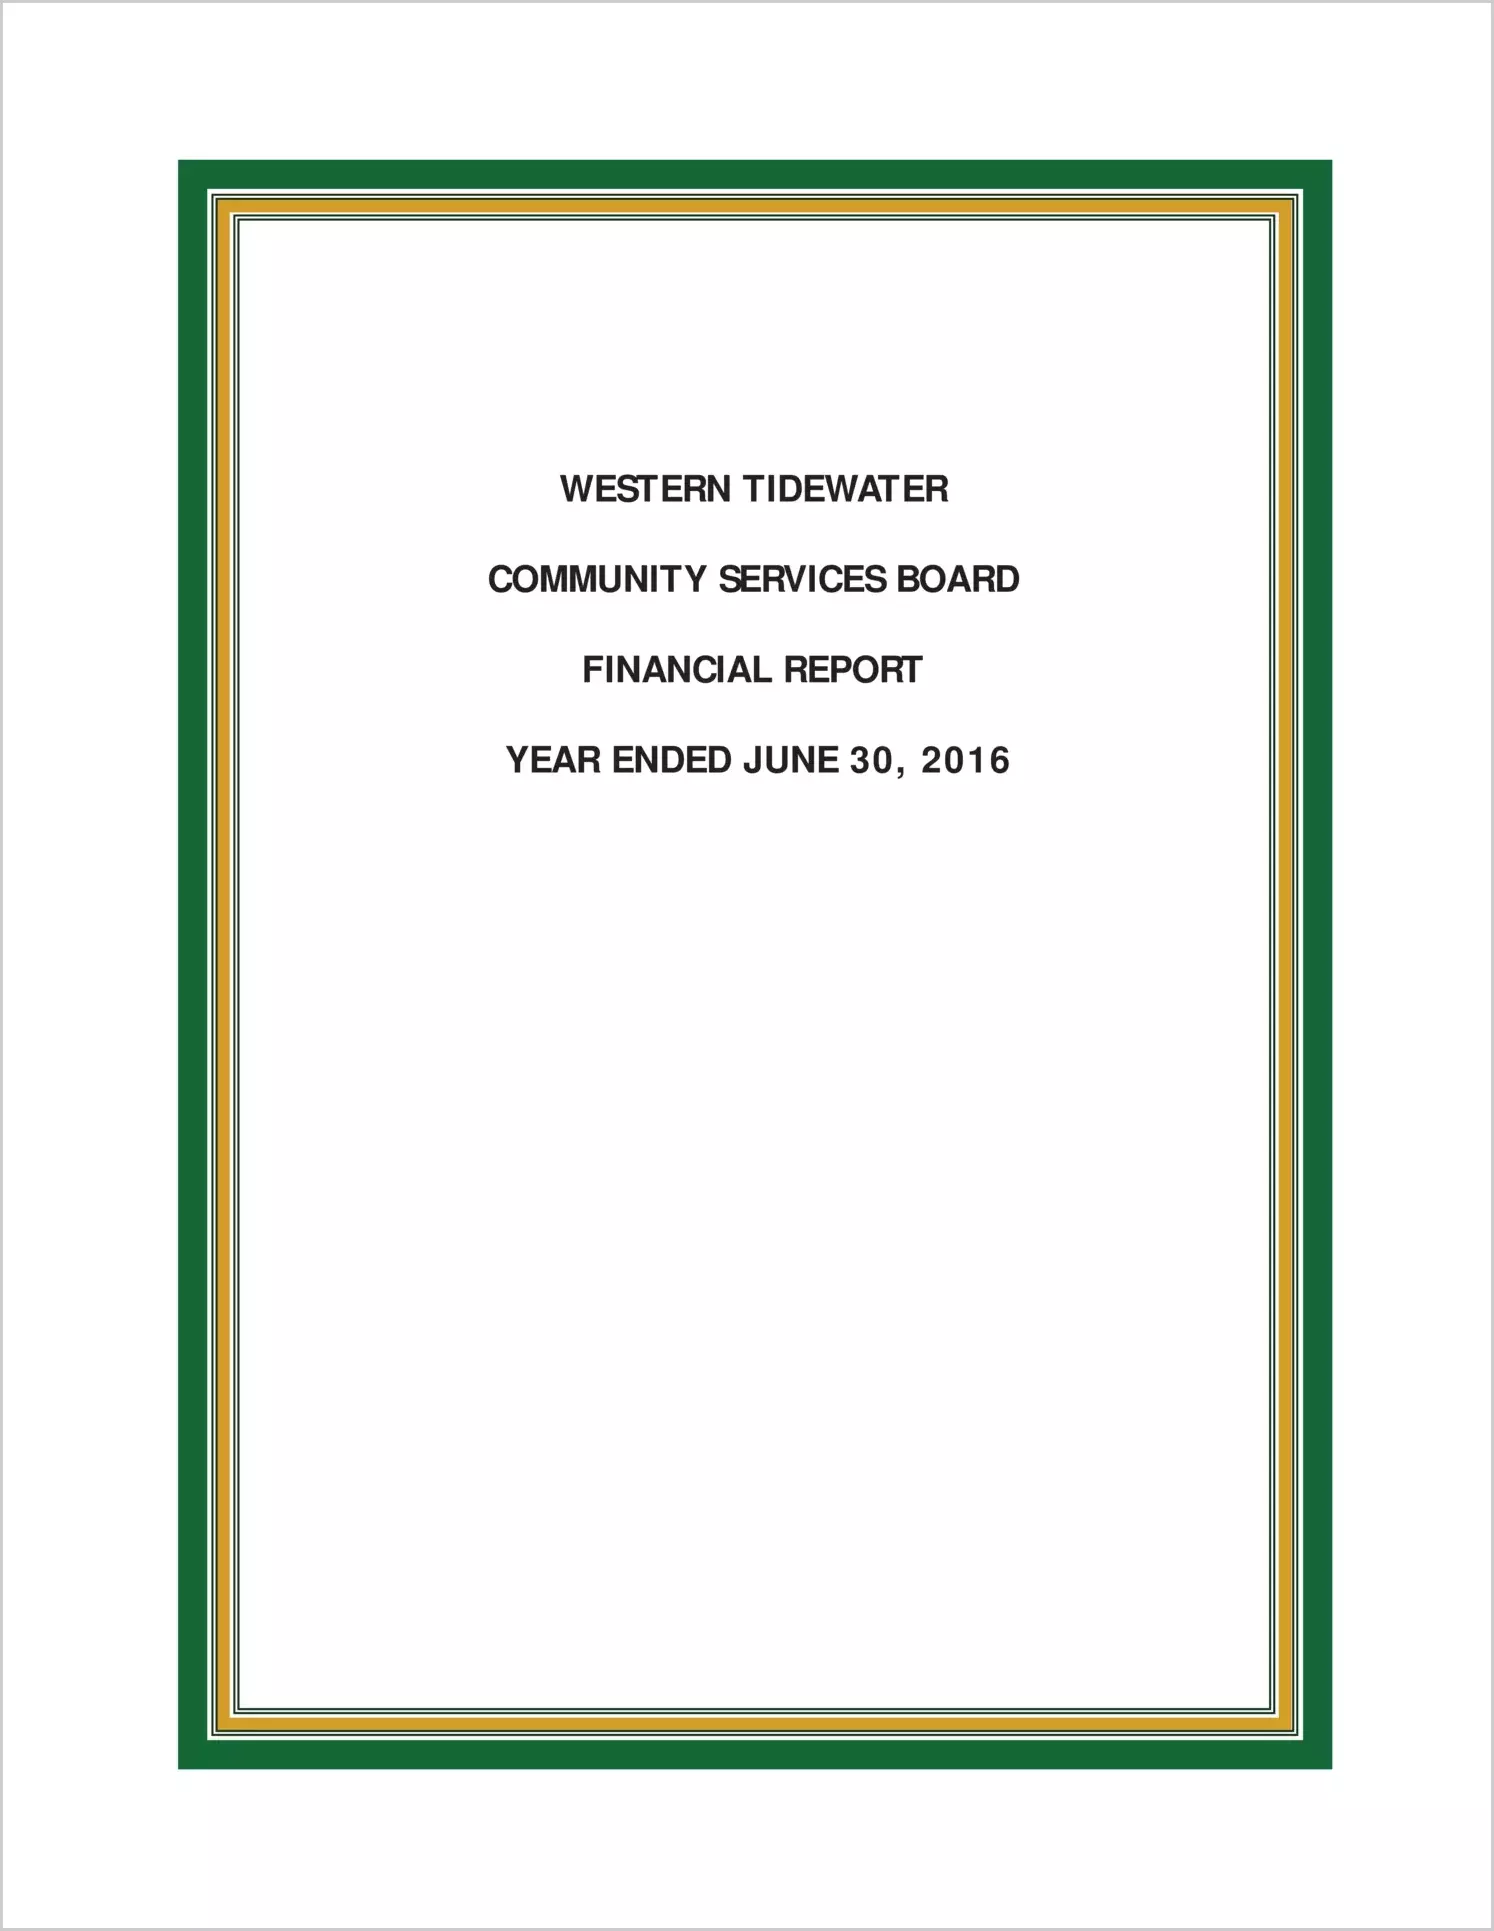 2016 ABC/Other Annual Financial Report  for Western Tidewater Community Services Board